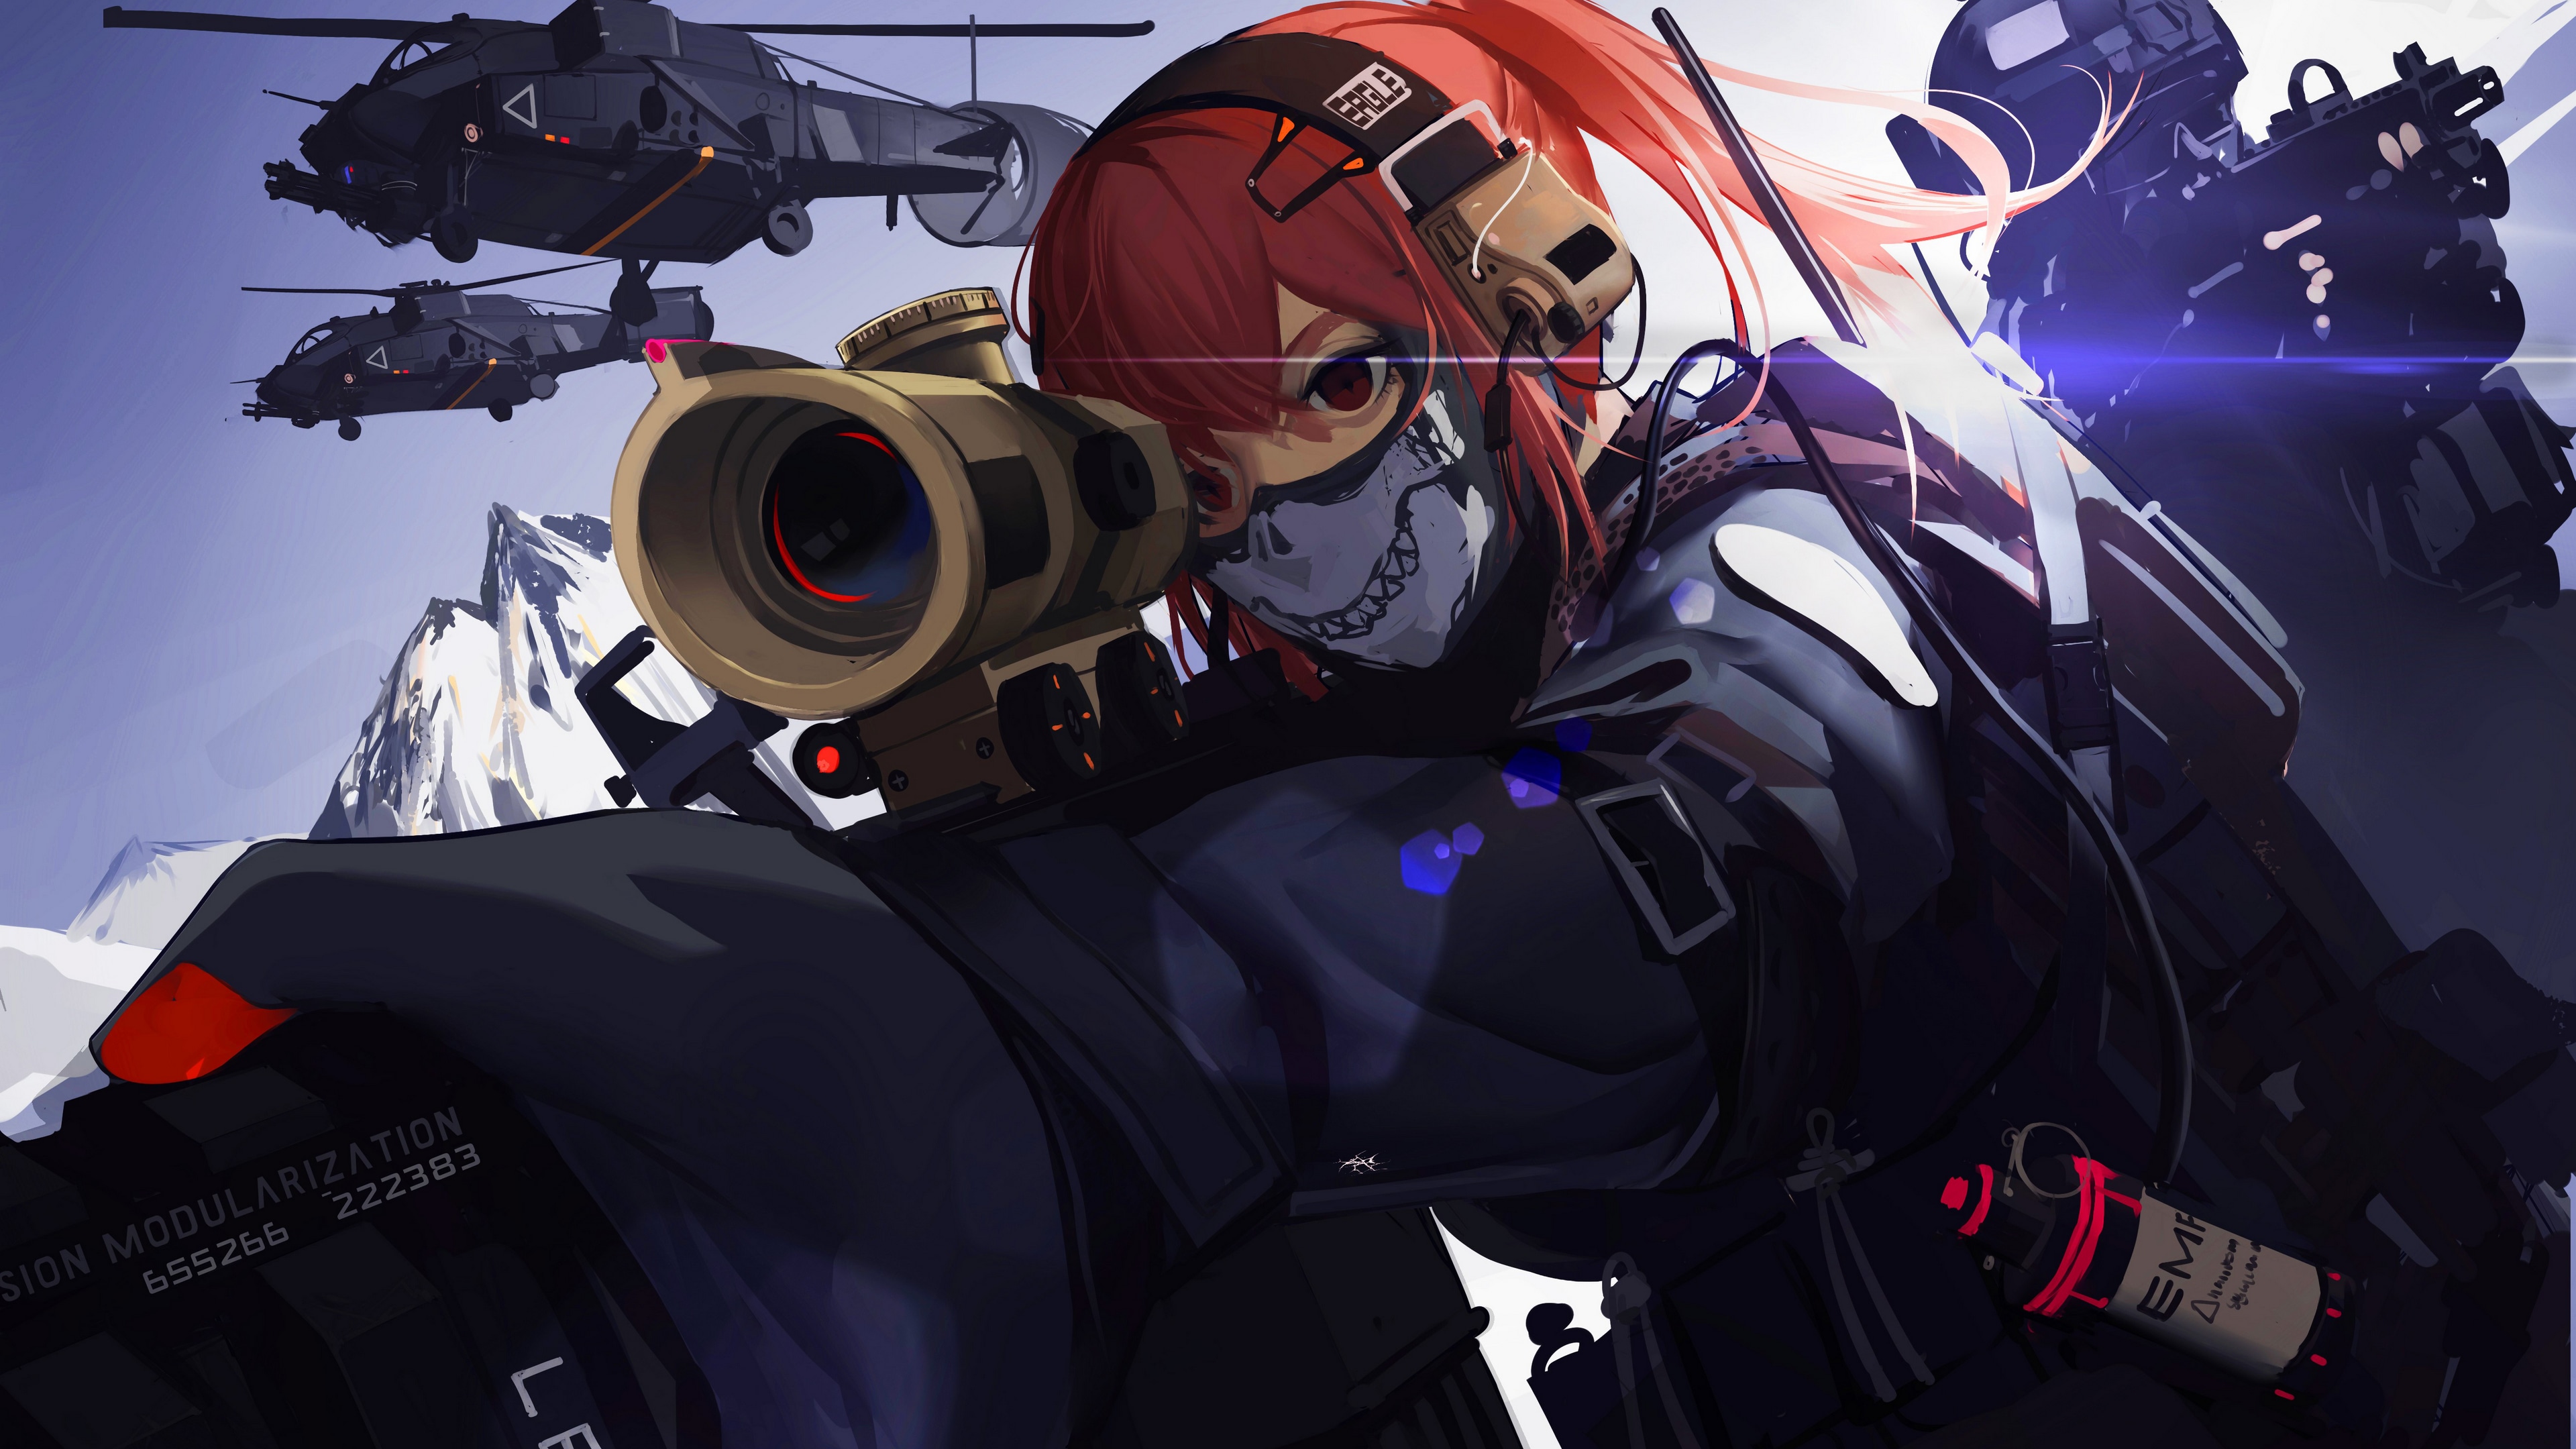 Wallpaper id military weapon soldier anime girls war spec ops black soldier free download